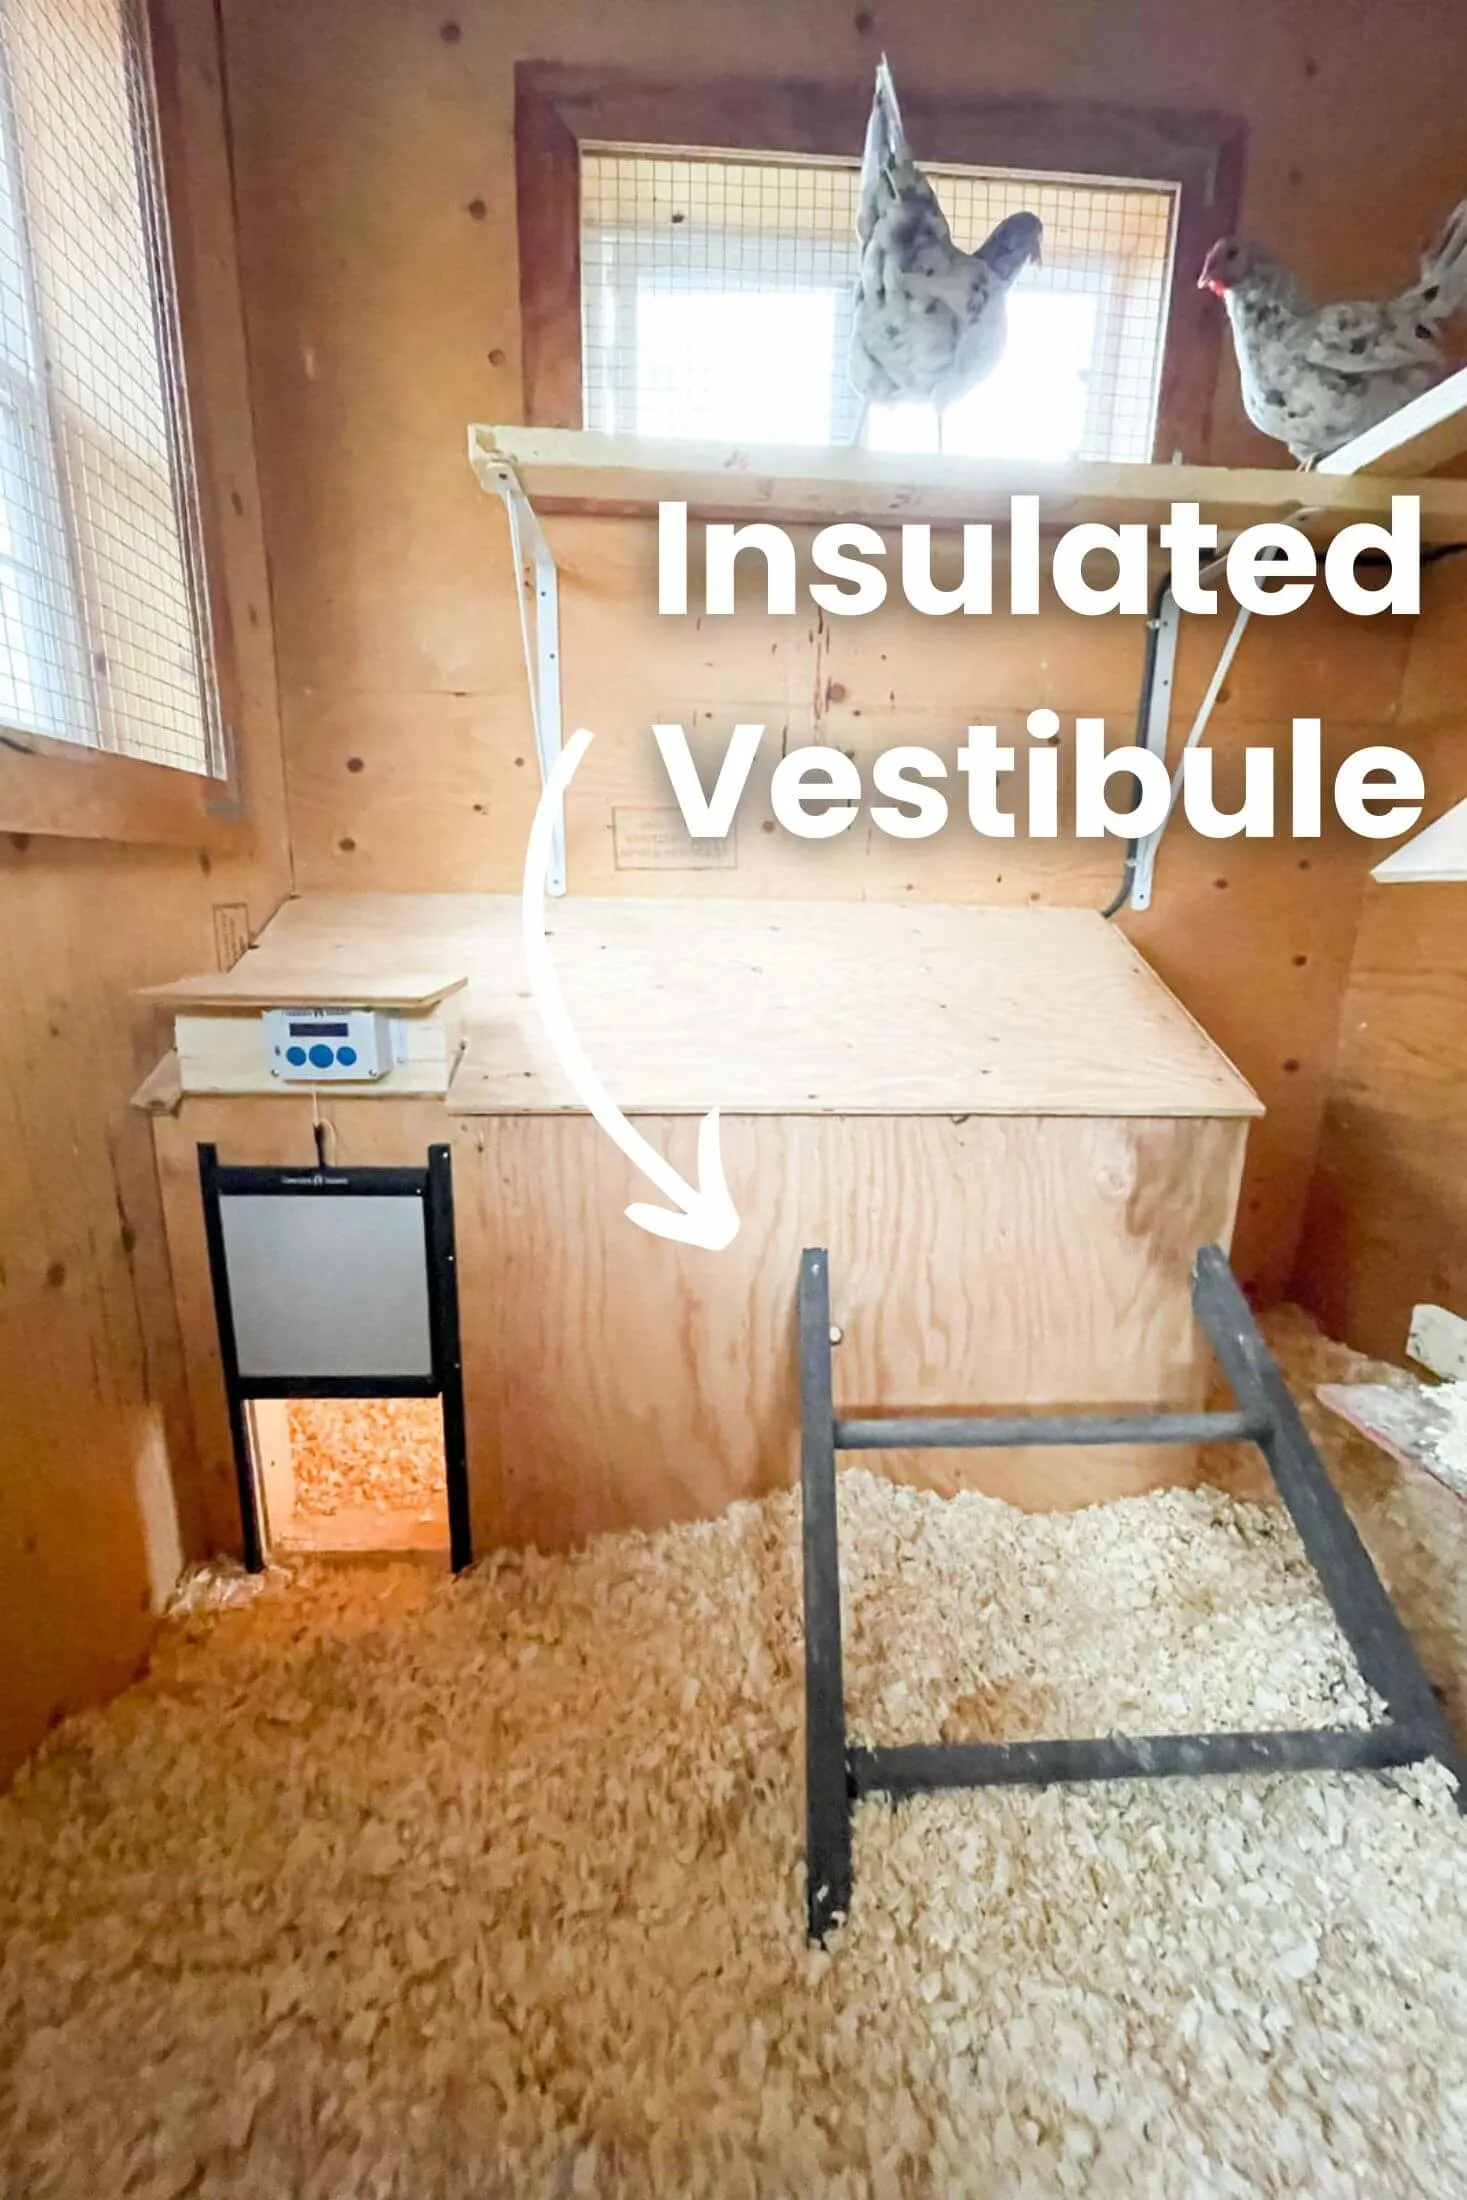 Showing the insulated vestibule in the chicken coop.